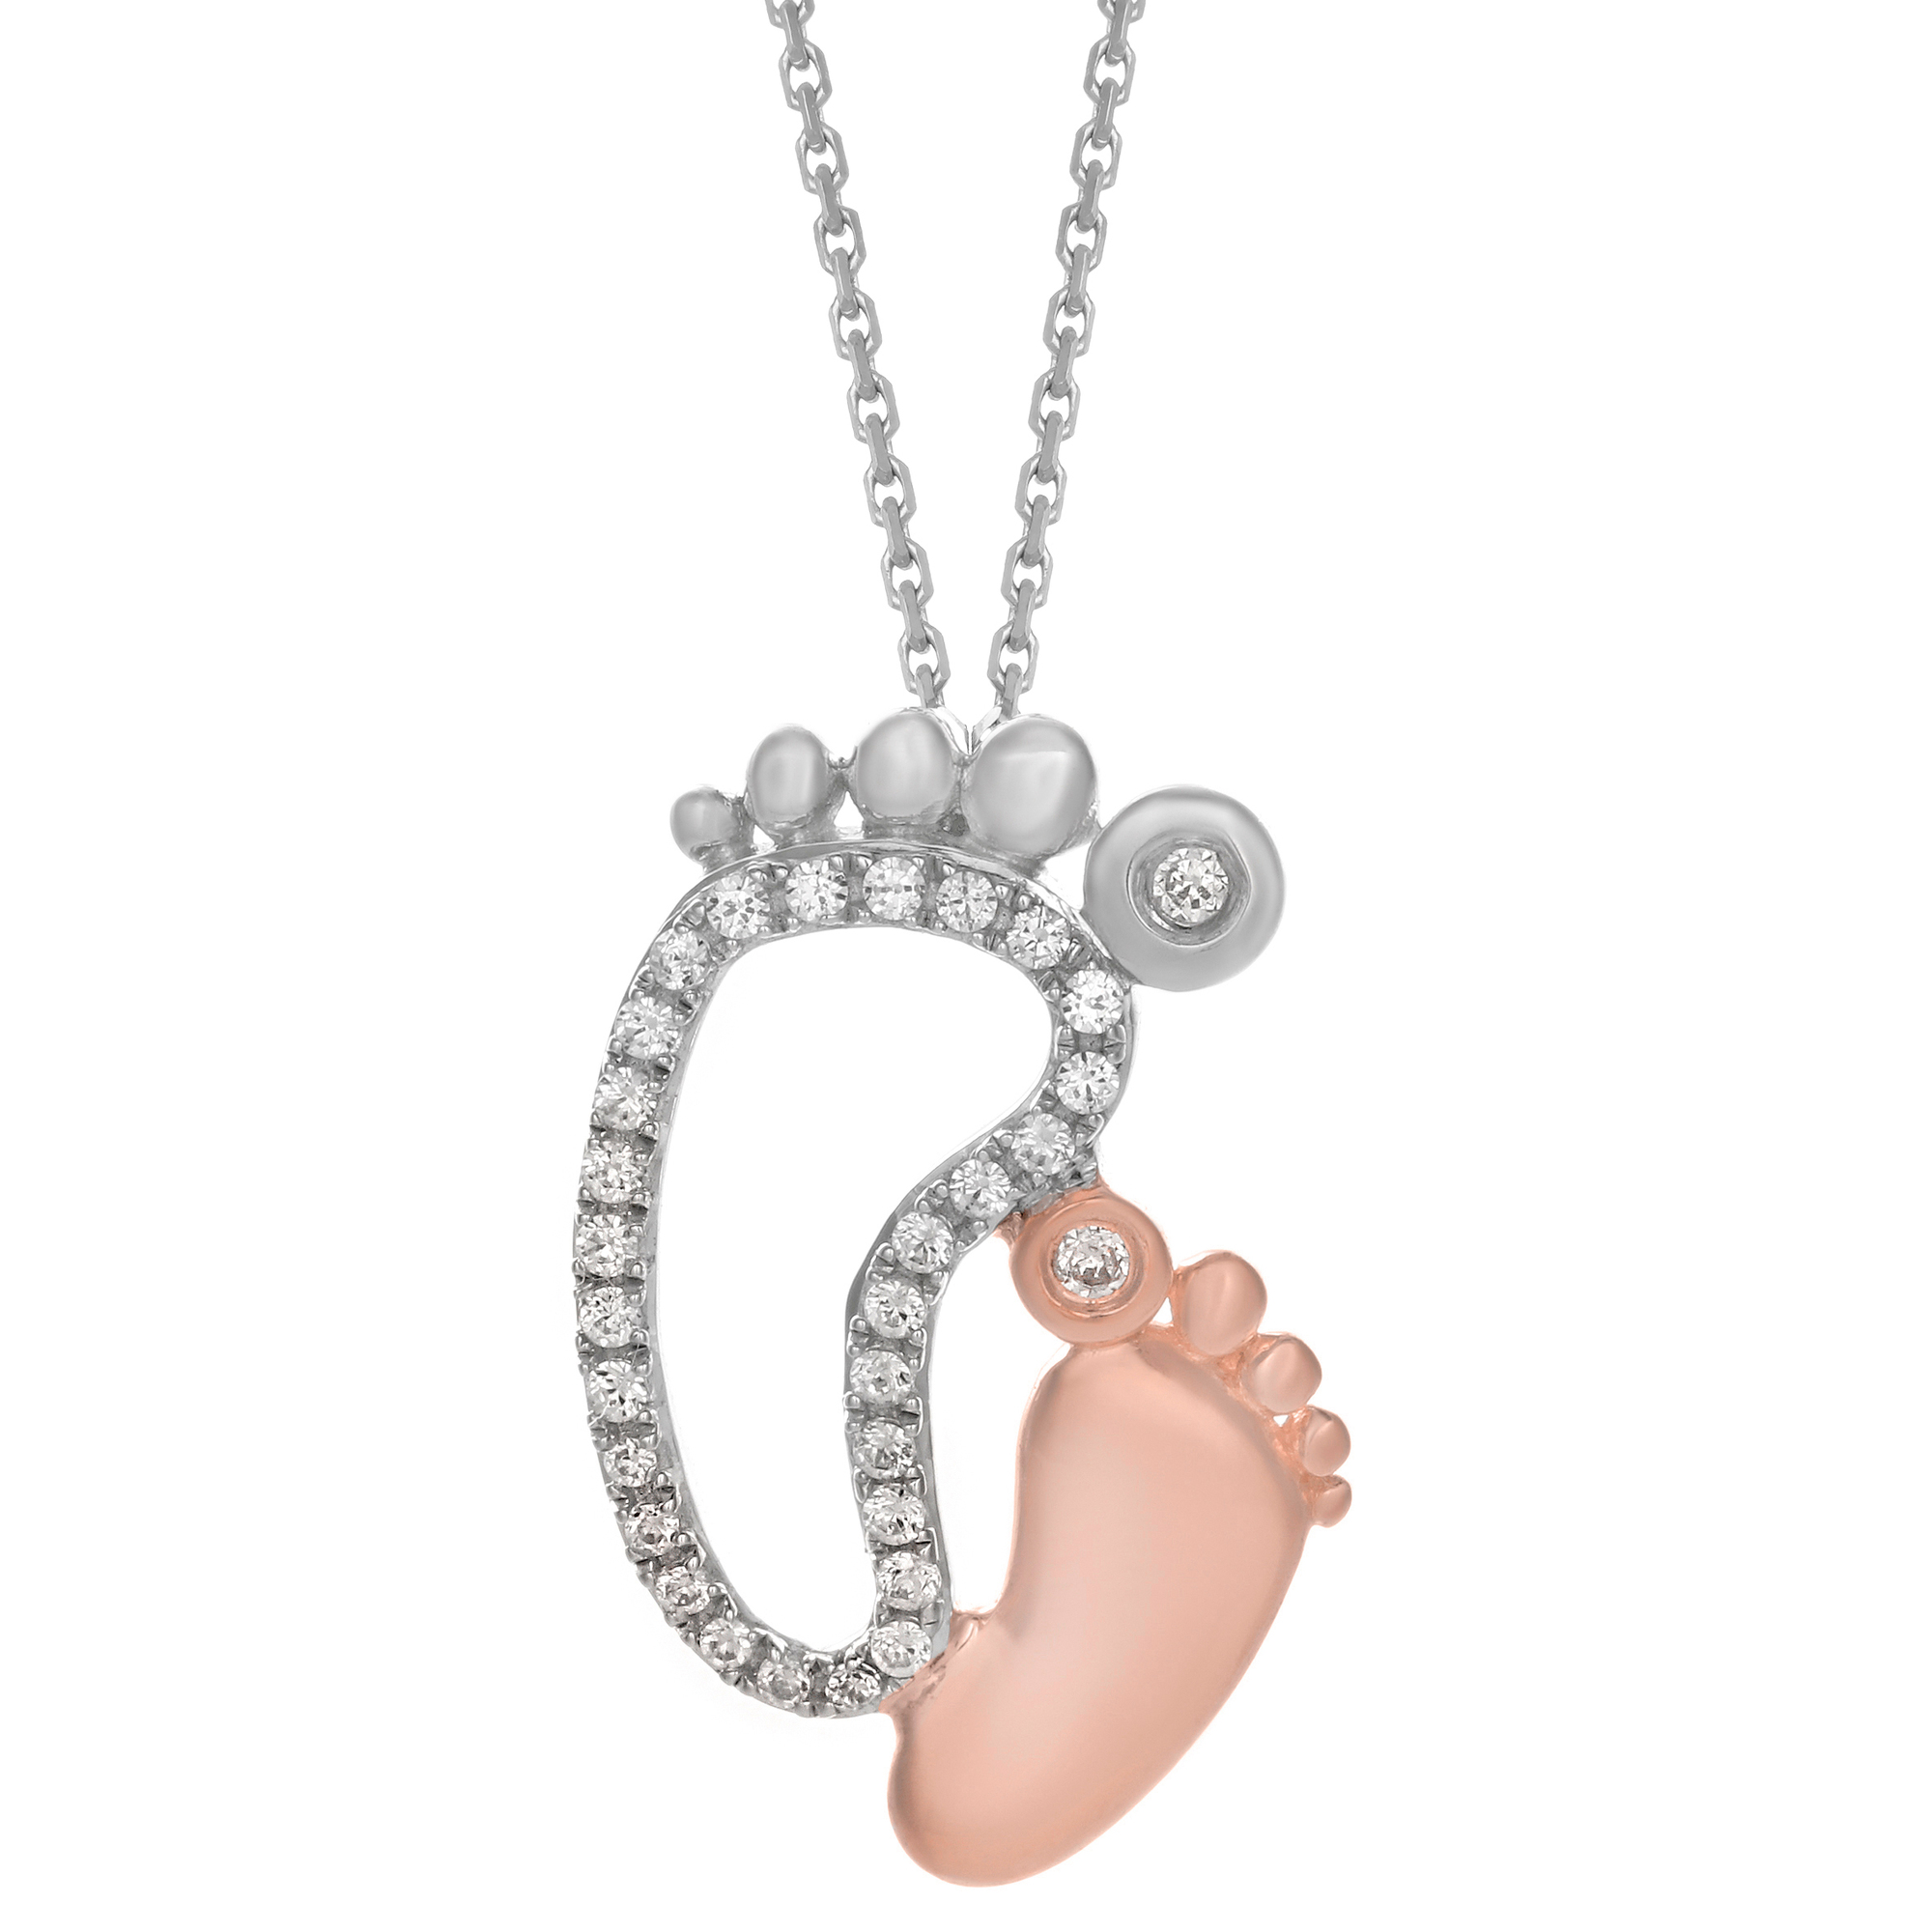 Women's Diamond Mom and Child Feet Pendant with Lobster Clasp, 10K White Gold, 0.12 Carat, 18" Cable Chain | Lavari Jewelers